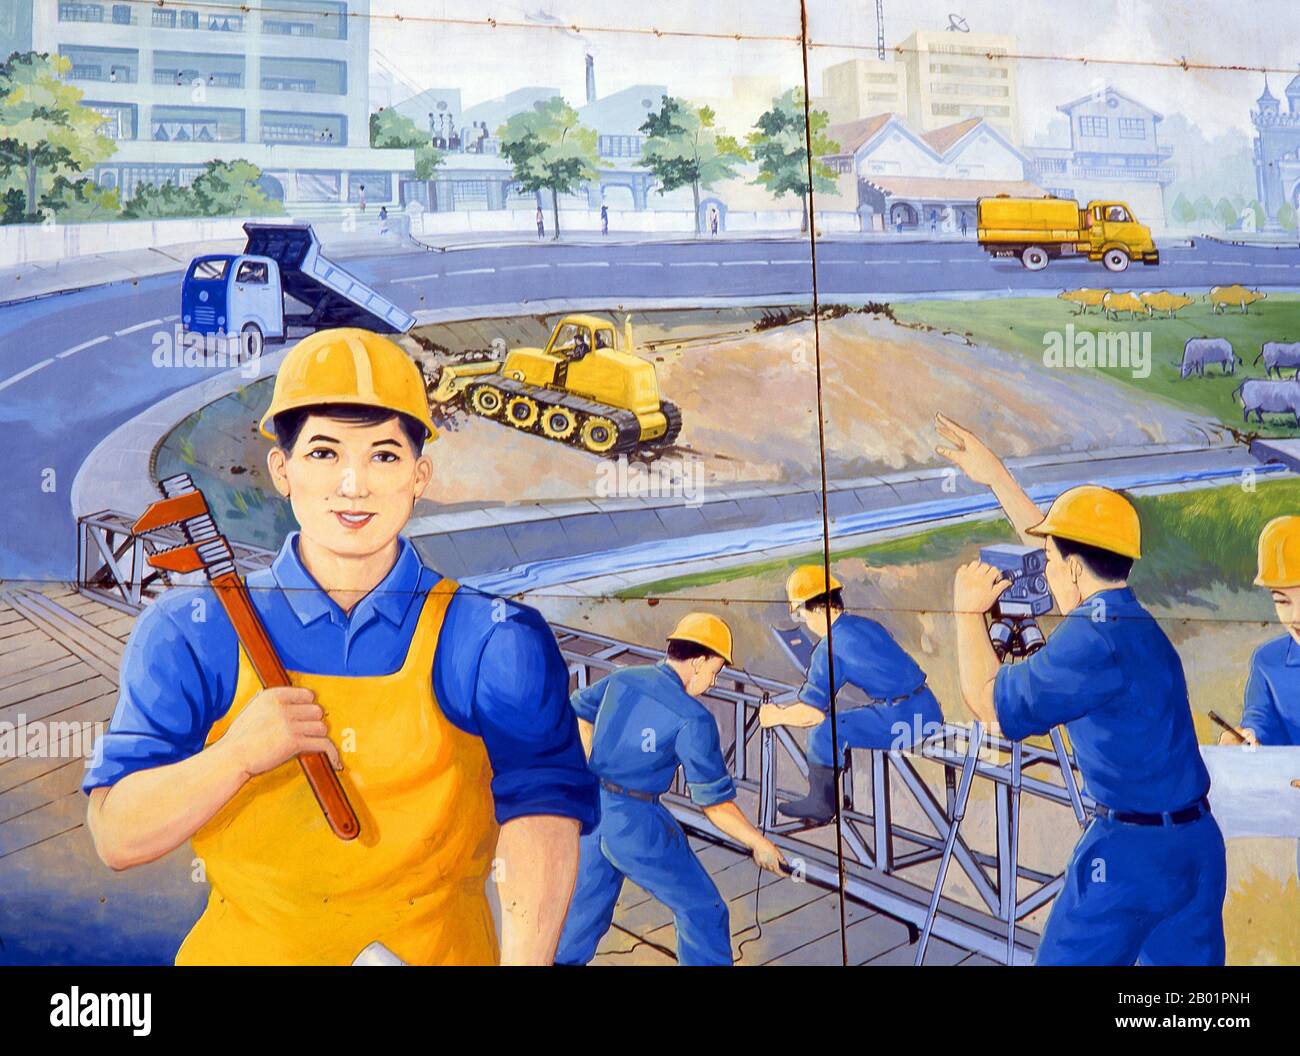 Laos: Construction, Revolutionary Socialist realist-style political poster on the streets of Vientiane.  Socialist realism is a style of realistic art which was developed in the Soviet Union and became a dominant style in other communist countries. Socialist realism is a teleologically-oriented style having its purpose the furtherance of the goals of socialism and communism. Although related, it should not be confused with social realism, a type of art that realistically depicts subjects of social concern. Unlike social realism, socialist realism often glorifies the roles of the poor. Stock Photo